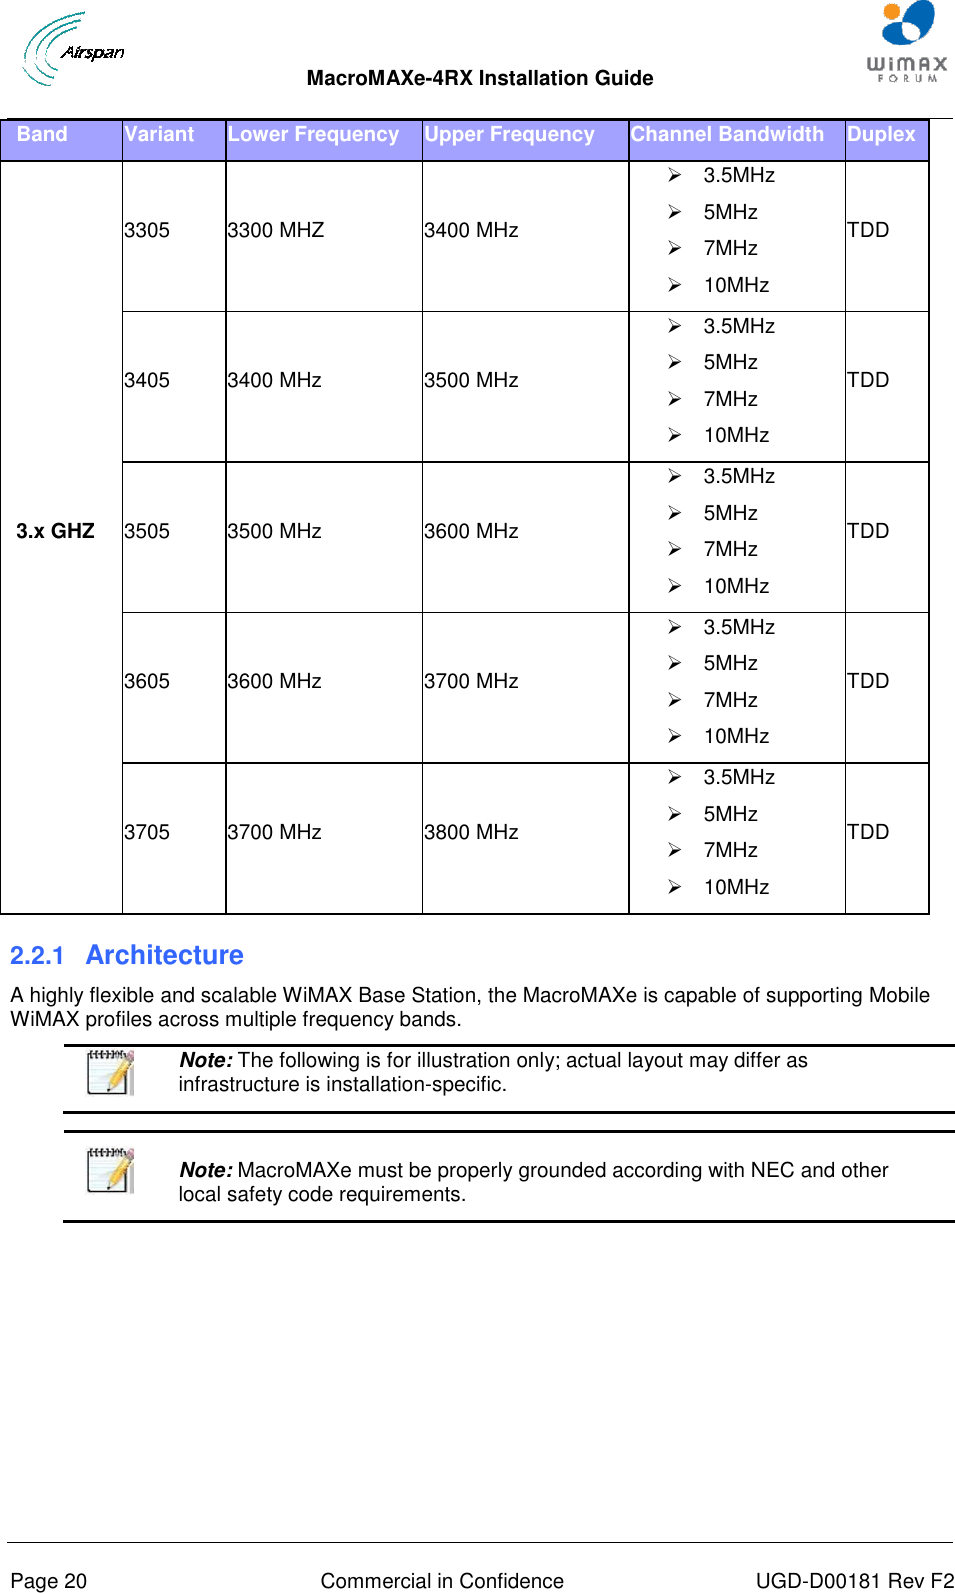  MacroMAXe-4RX Installation Guide       Page 20  Commercial in Confidence  UGD-D00181 Rev F2 Band Variant Lower Frequency Upper Frequency Channel Bandwidth Duplex 3.x GHZ 3305 3300 MHZ 3400 MHz   3.5MHz   5MHz   7MHz   10MHz TDD 3405 3400 MHz 3500 MHz   3.5MHz   5MHz   7MHz   10MHz TDD 3505 3500 MHz 3600 MHz   3.5MHz   5MHz   7MHz   10MHz TDD 3605 3600 MHz 3700 MHz   3.5MHz   5MHz   7MHz   10MHz TDD 3705 3700 MHz 3800 MHz   3.5MHz   5MHz   7MHz   10MHz TDD 2.2.1  Architecture A highly flexible and scalable WiMAX Base Station, the MacroMAXe is capable of supporting Mobile WiMAX profiles across multiple frequency bands.   Note: The following is for illustration only; actual layout may differ as infrastructure is installation-specific.     Note: MacroMAXe must be properly grounded according with NEC and other local safety code requirements.  